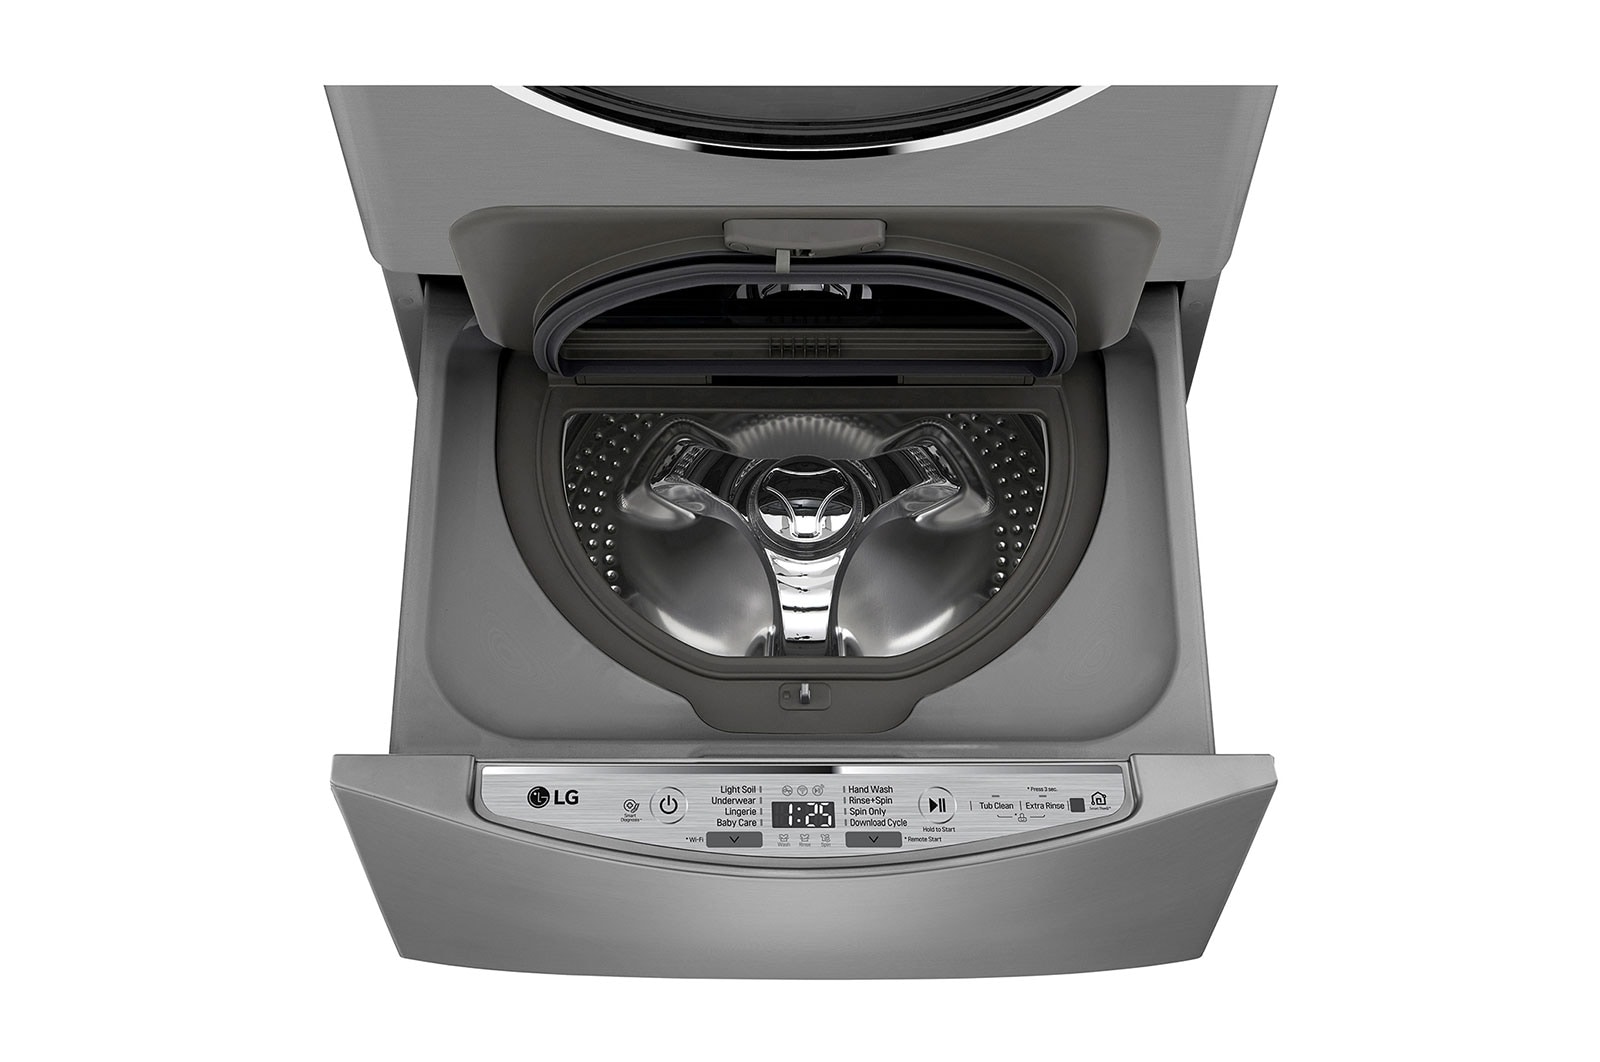 LG USHERS IN A NEW AGE OF CONVENIENCE WITH REVOLUTIONARY TWIN WASH